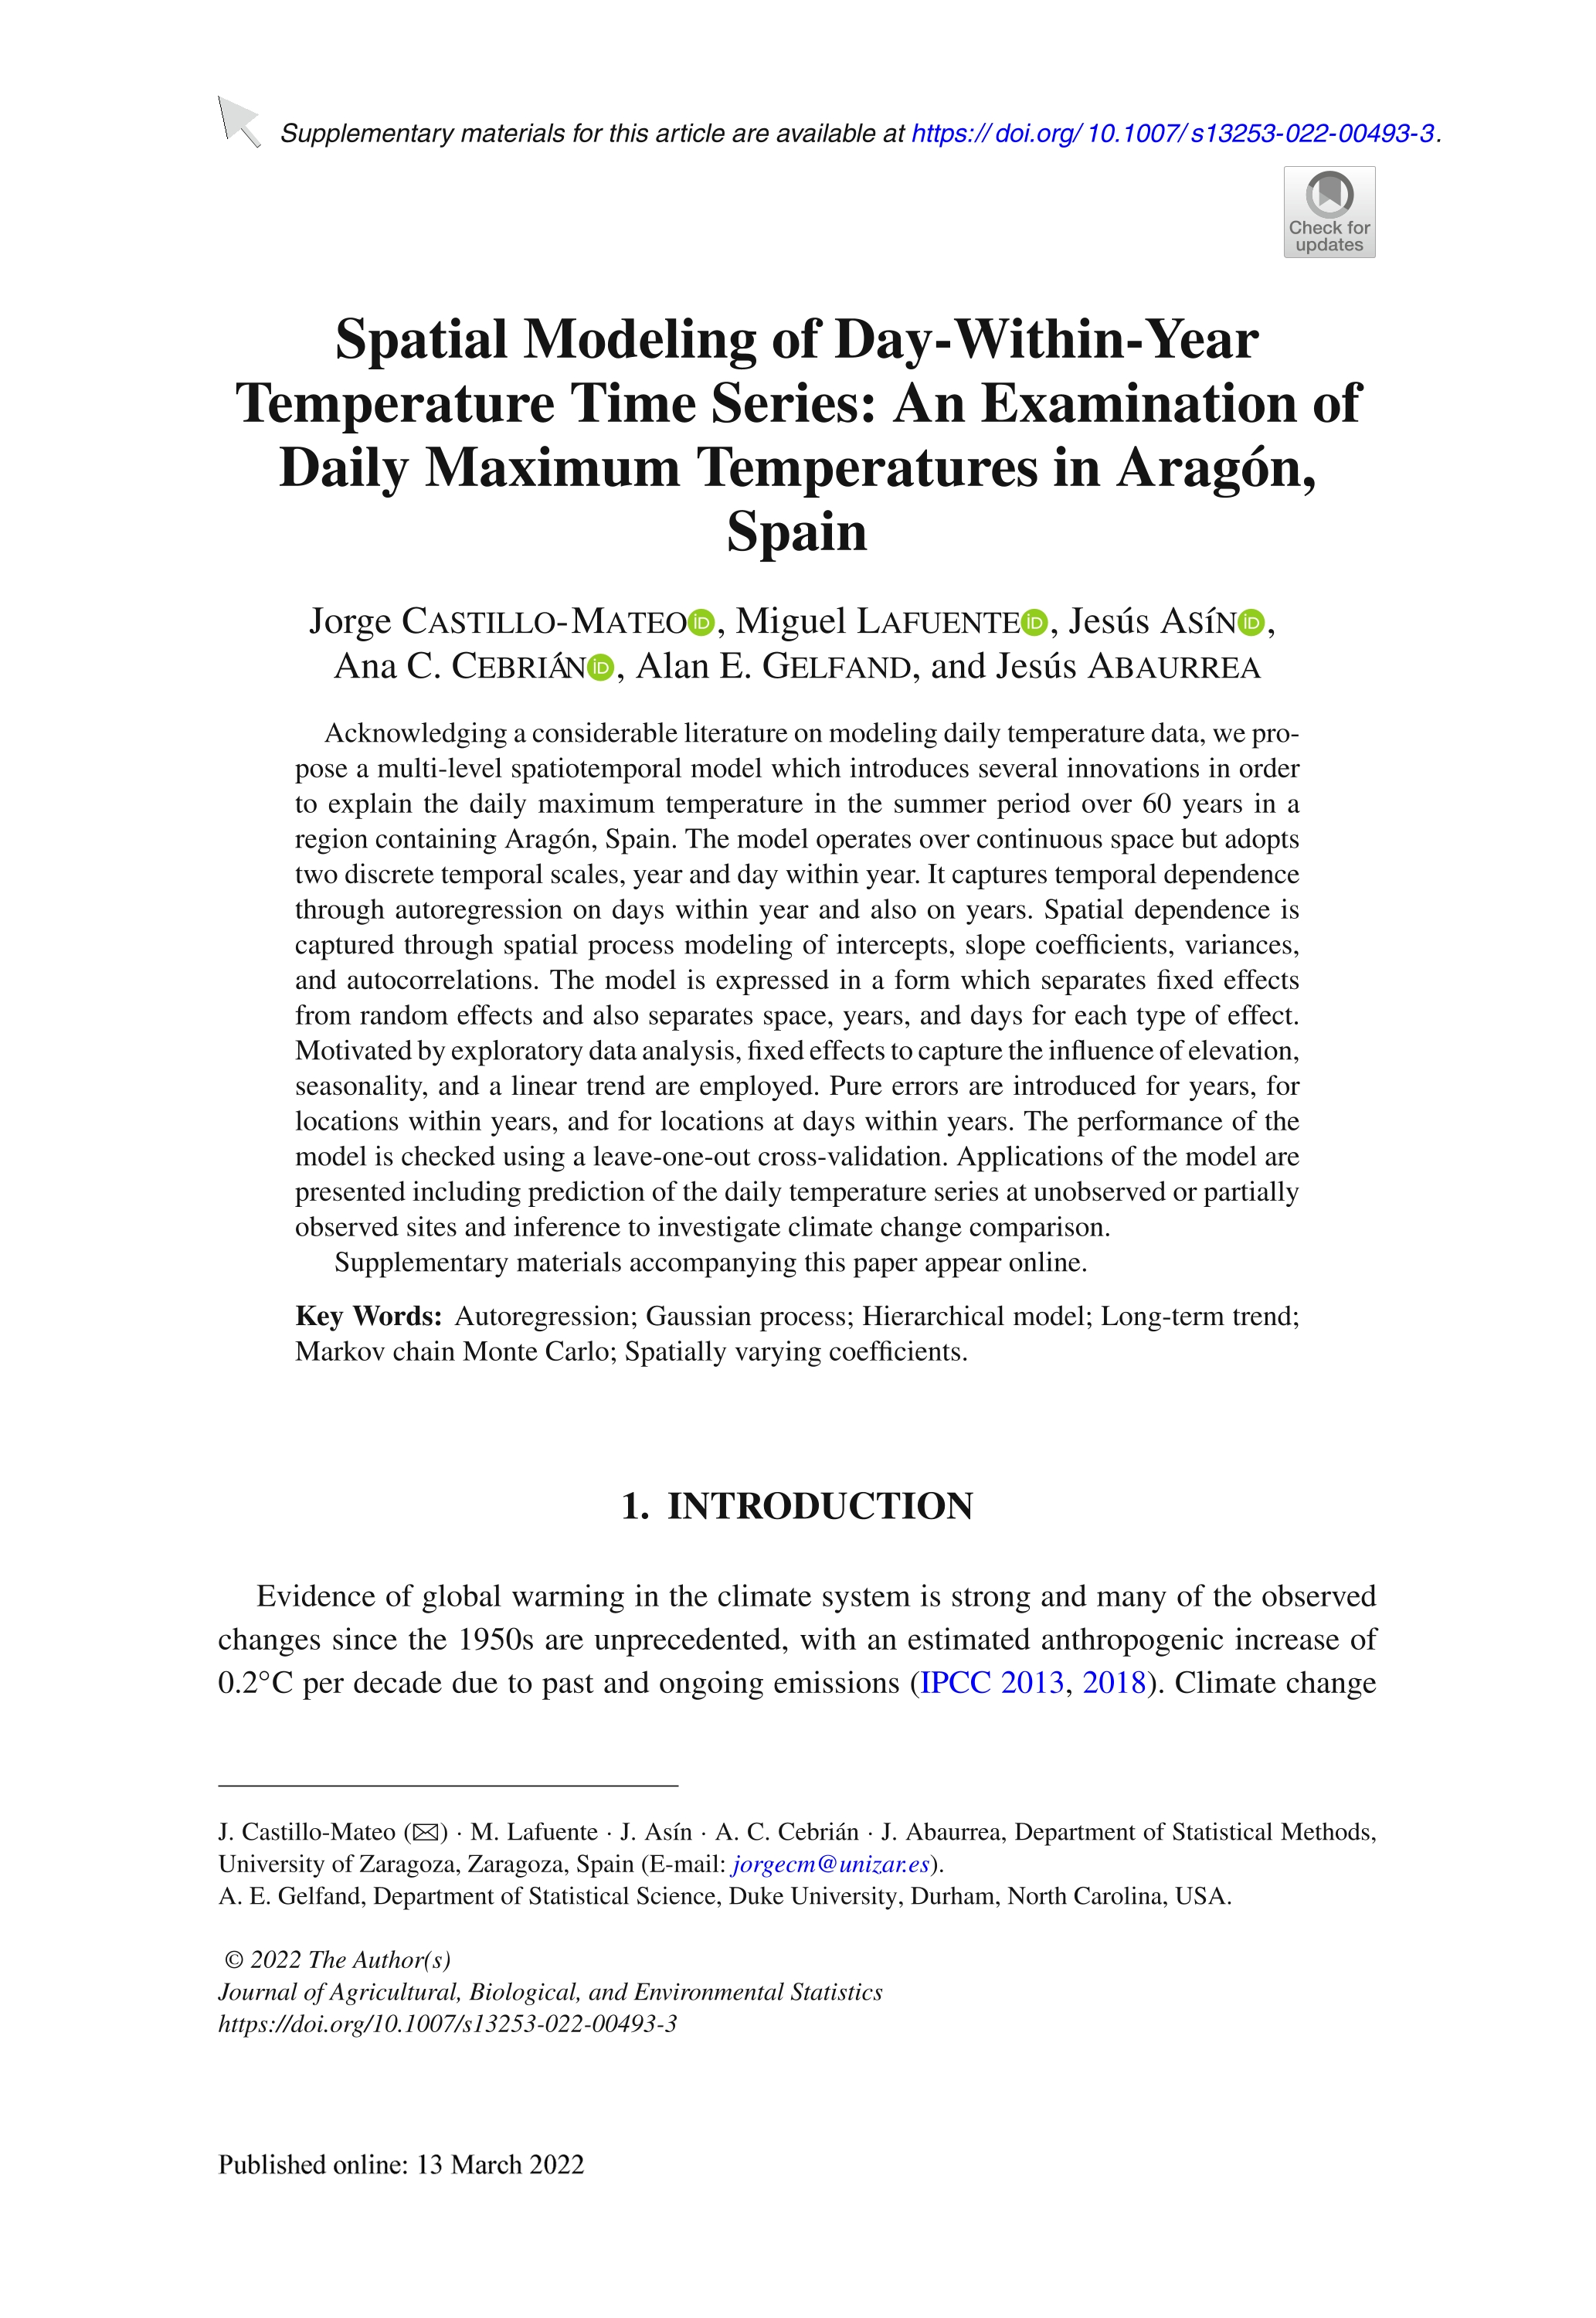 Spatial Modeling of Day-Within-Year Temperature Time Series: An Examination of Daily Maximum Temperatures in Aragon, Spain